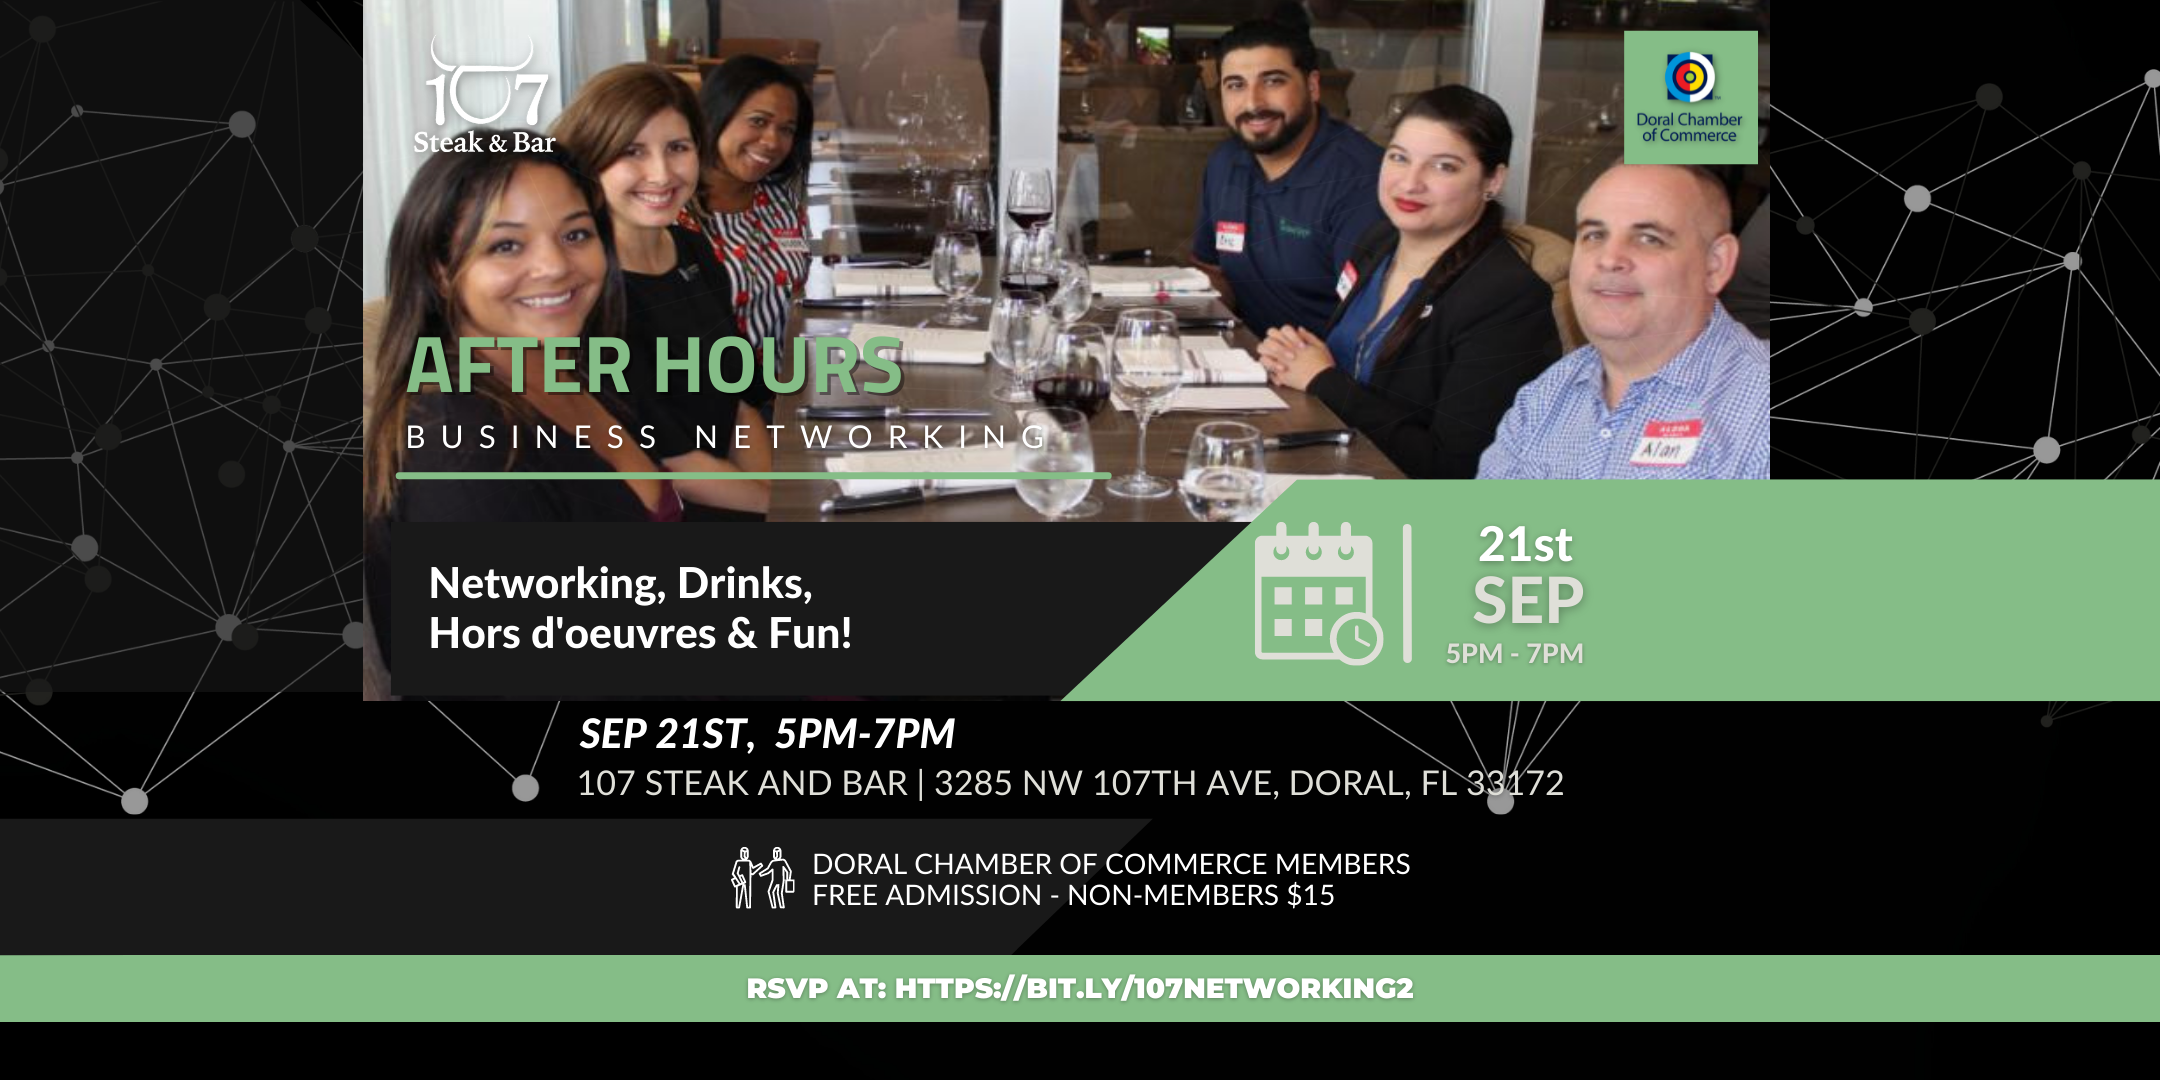 September Networking after hours at 107 steak and bar wide new